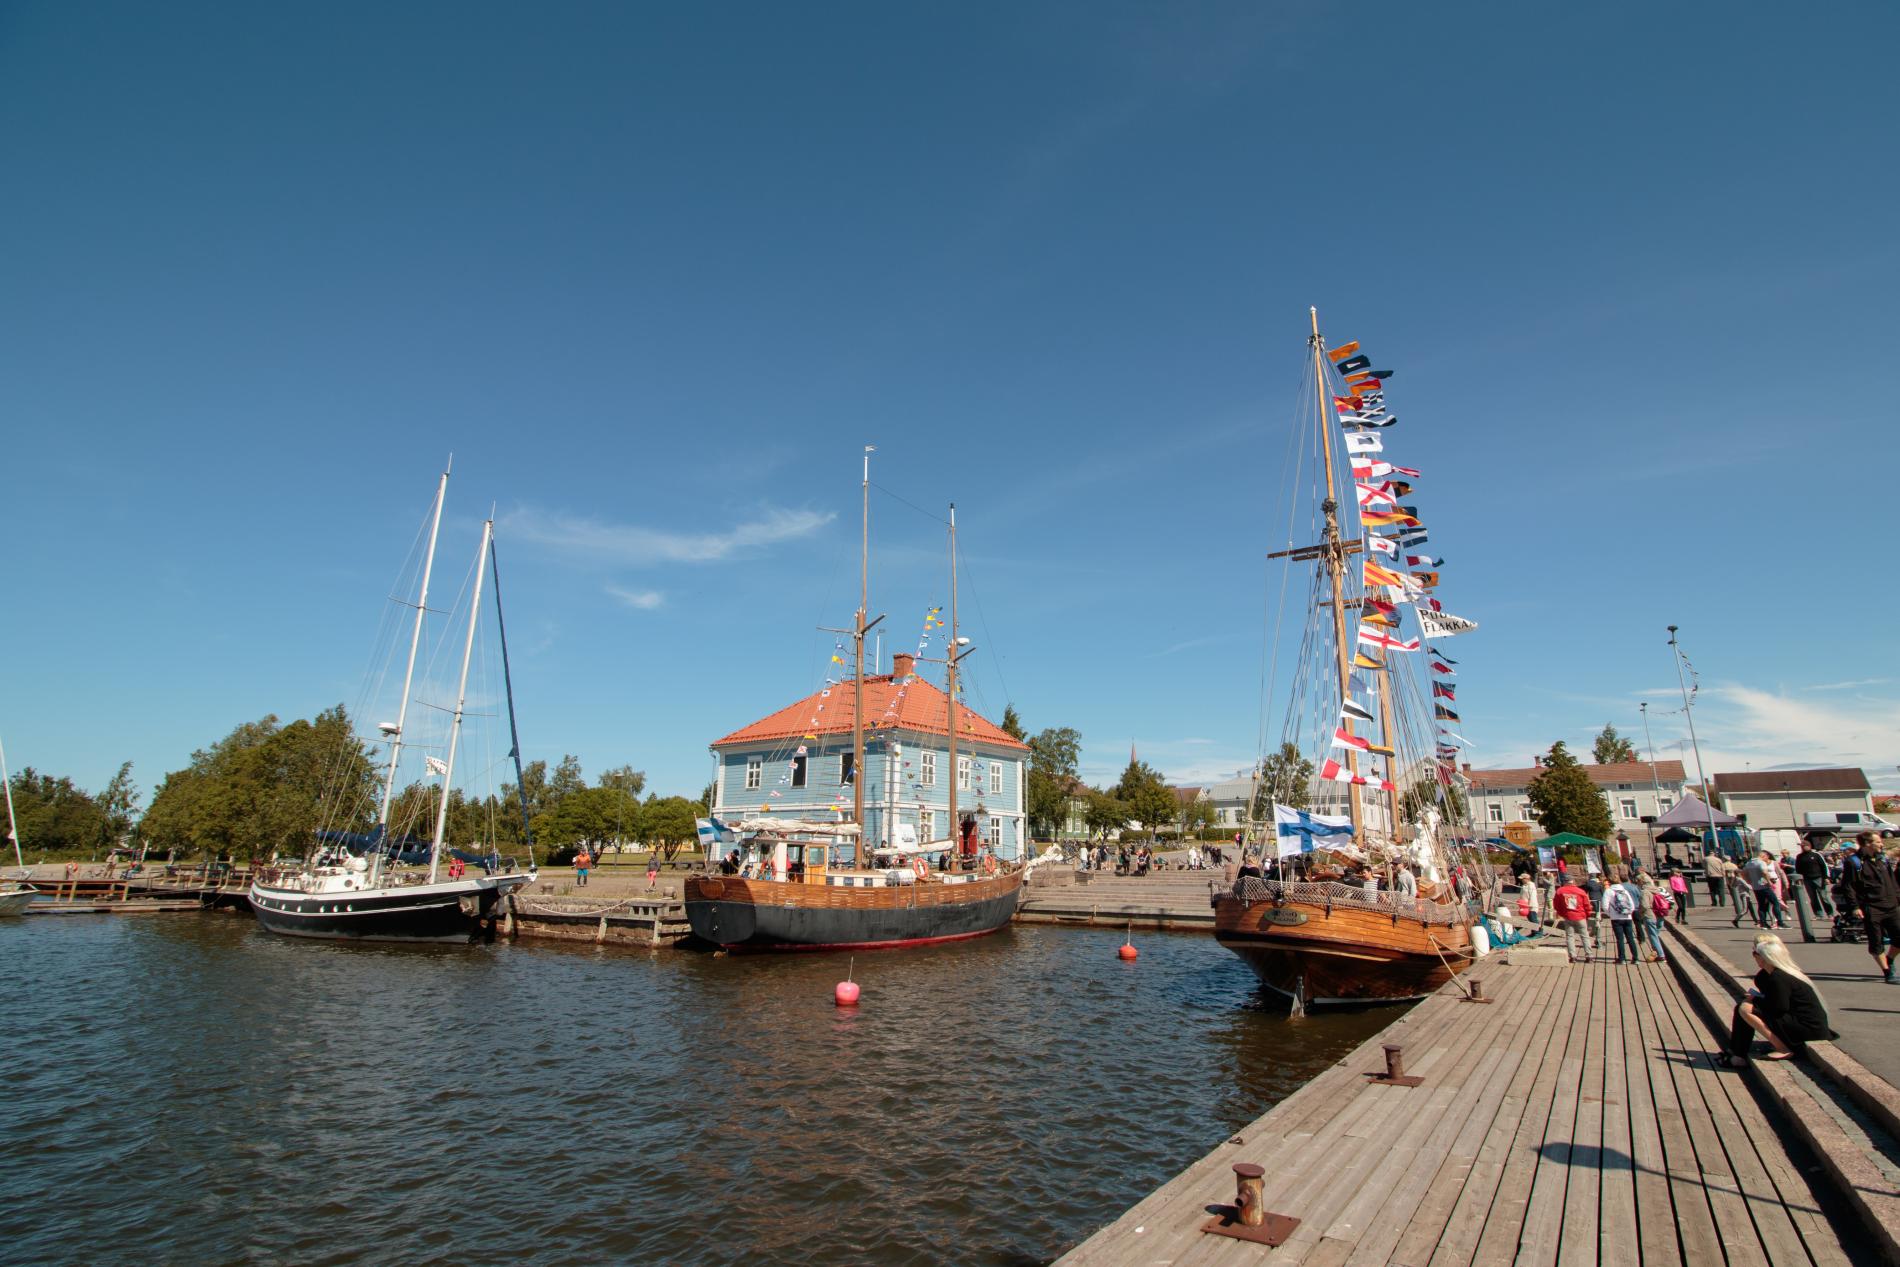 Magnificent sailing ships are on display at Raahe’s museum shore